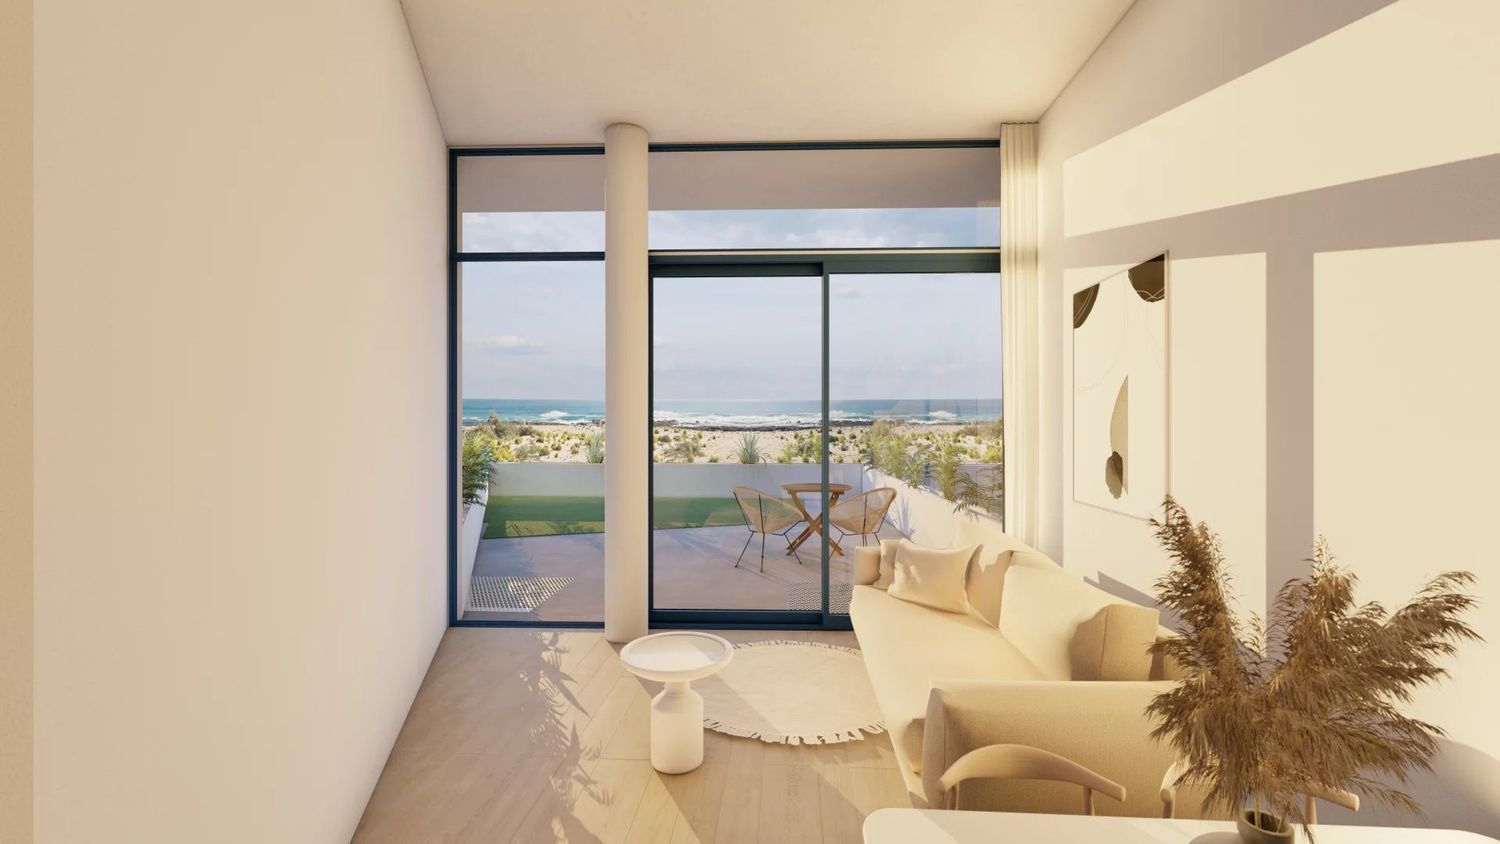 Flat for sale in first line of the sea in El Cotillo, La Oliva